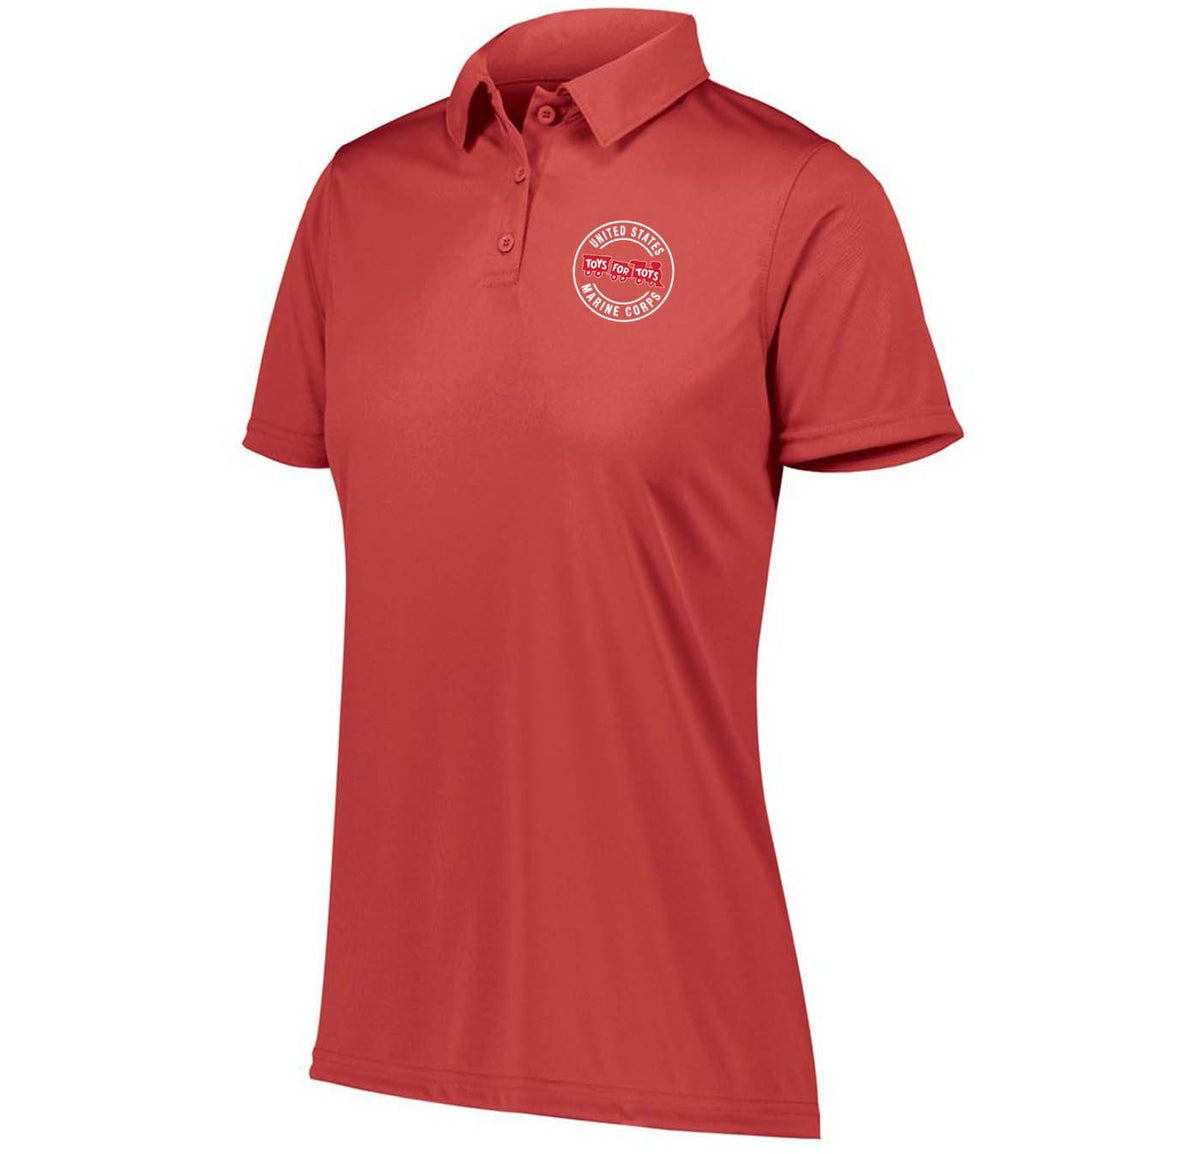 Augusta Dri-Fit Performance Circle TFT Chest Seal Screen Print Women's Polo Polo Marine Corps Direct XS RED 